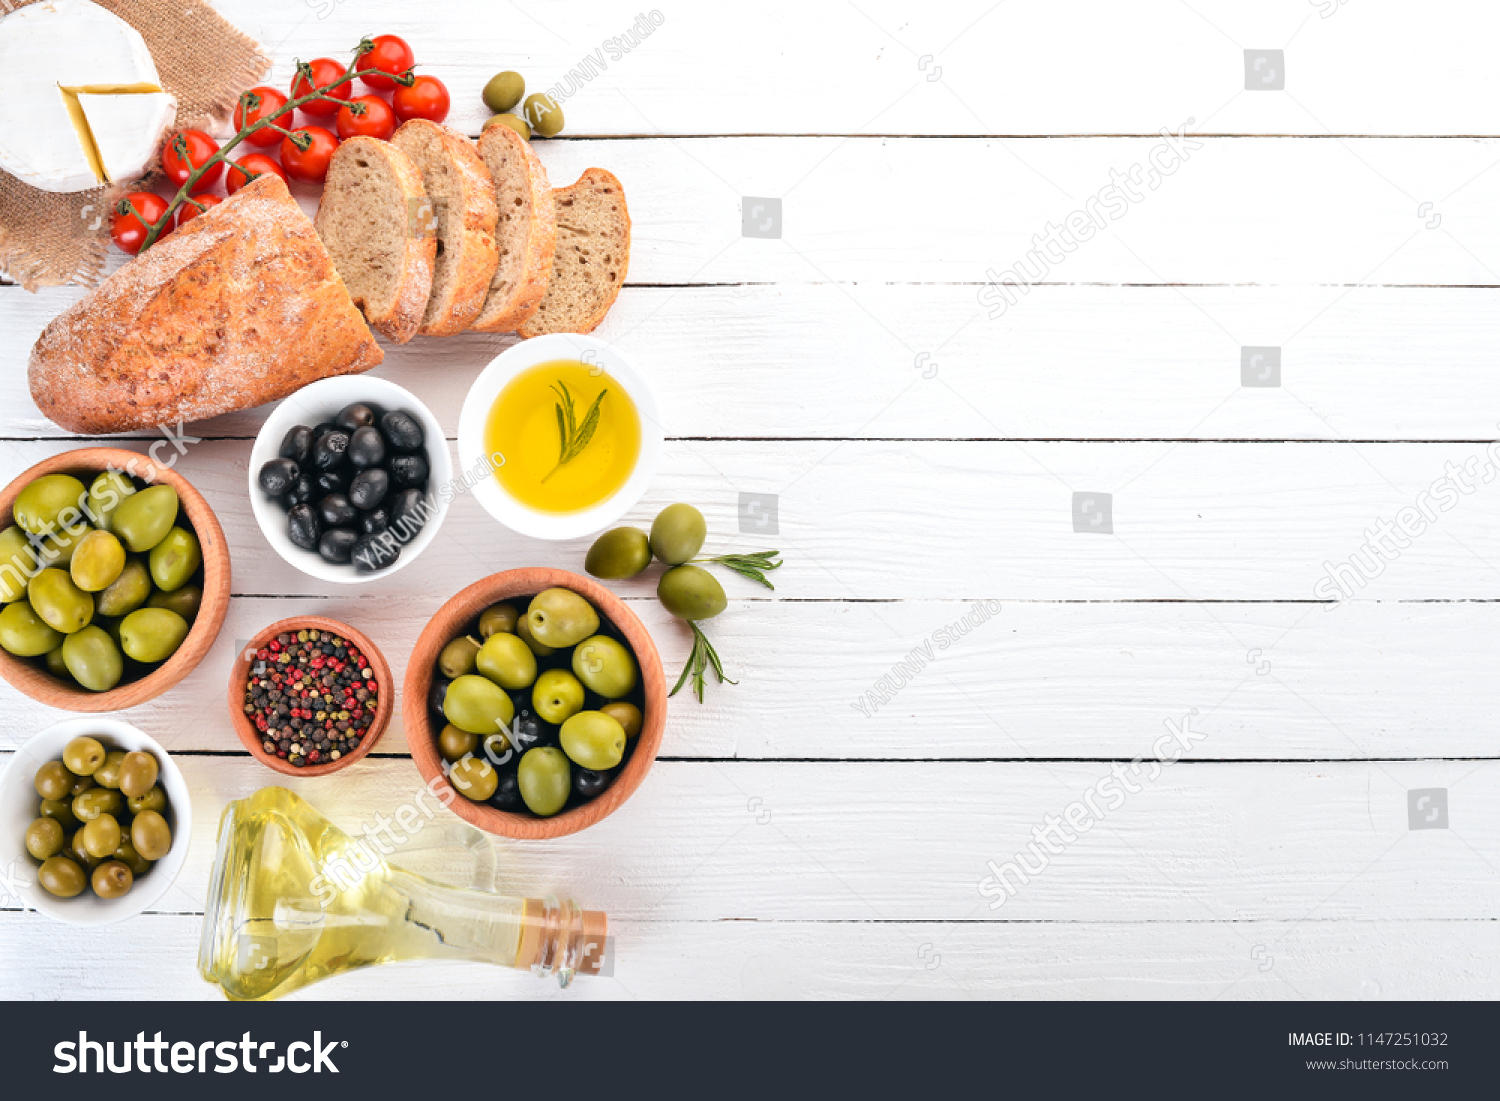 Green olives and black olives, oil, bread, cheese and snacks. Italian cuisine. On a white wooden table. Top view. Free space for text. #1147251032